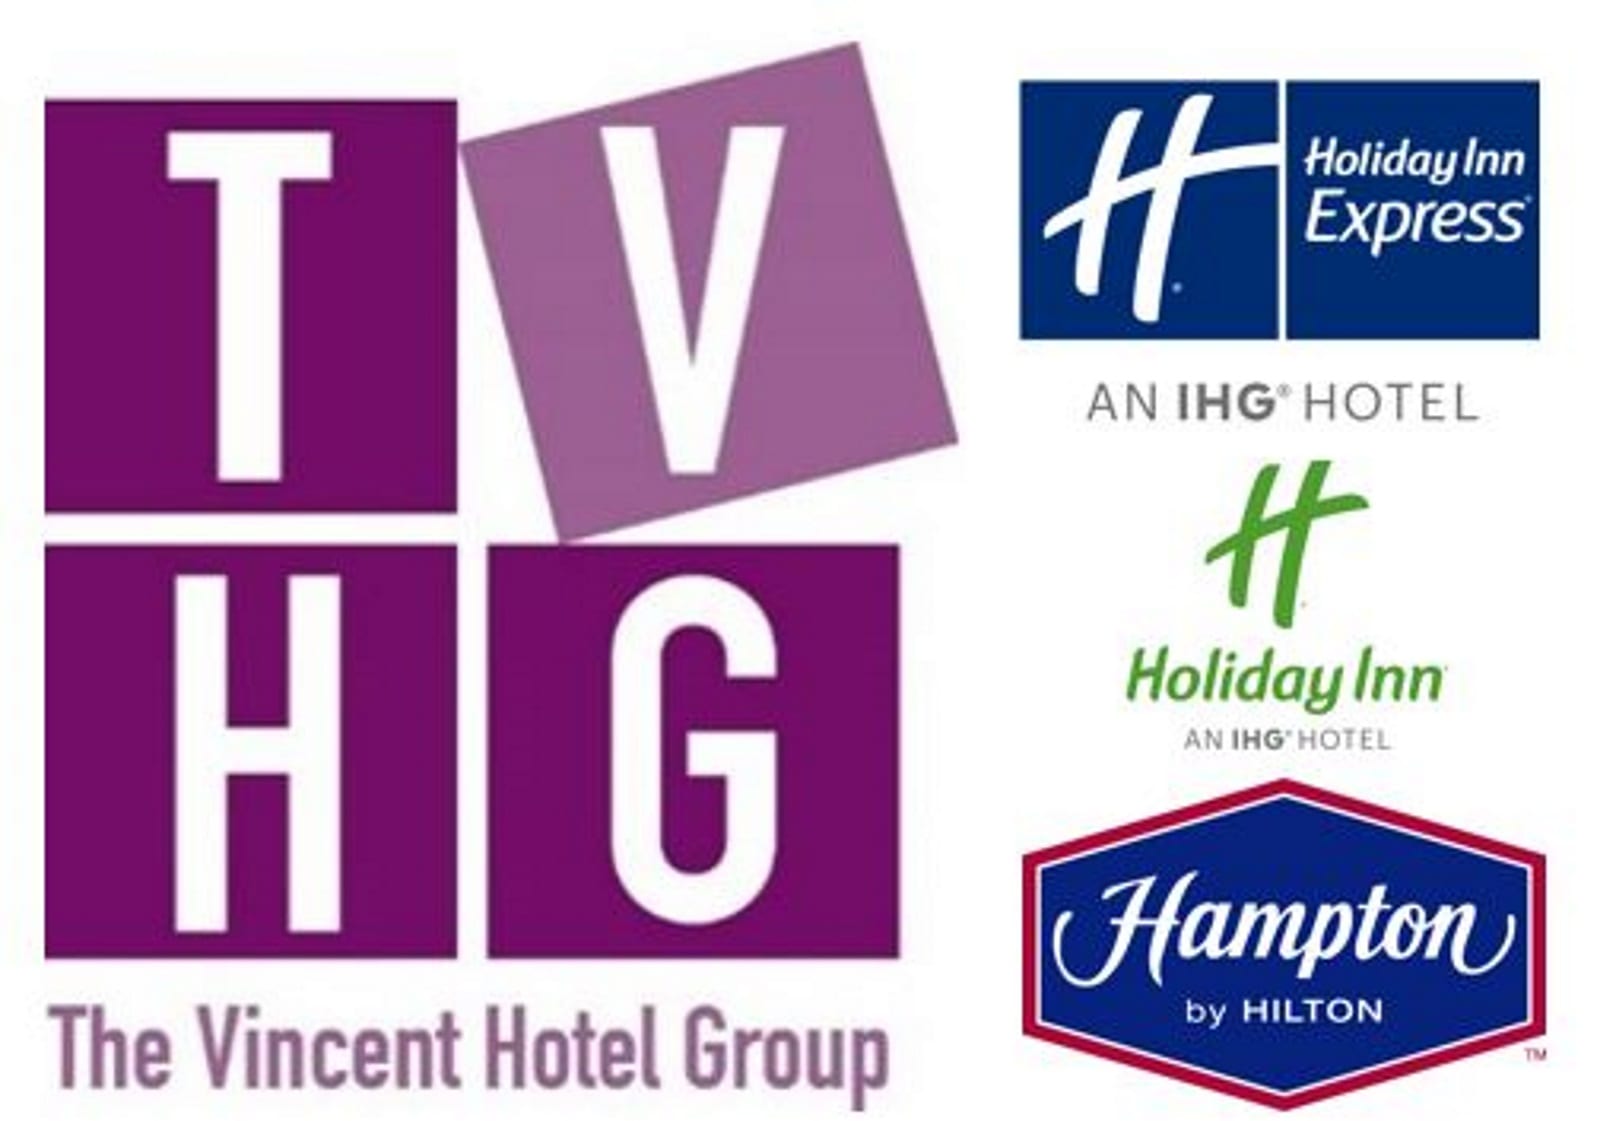 The Vincent Hotel Group logos